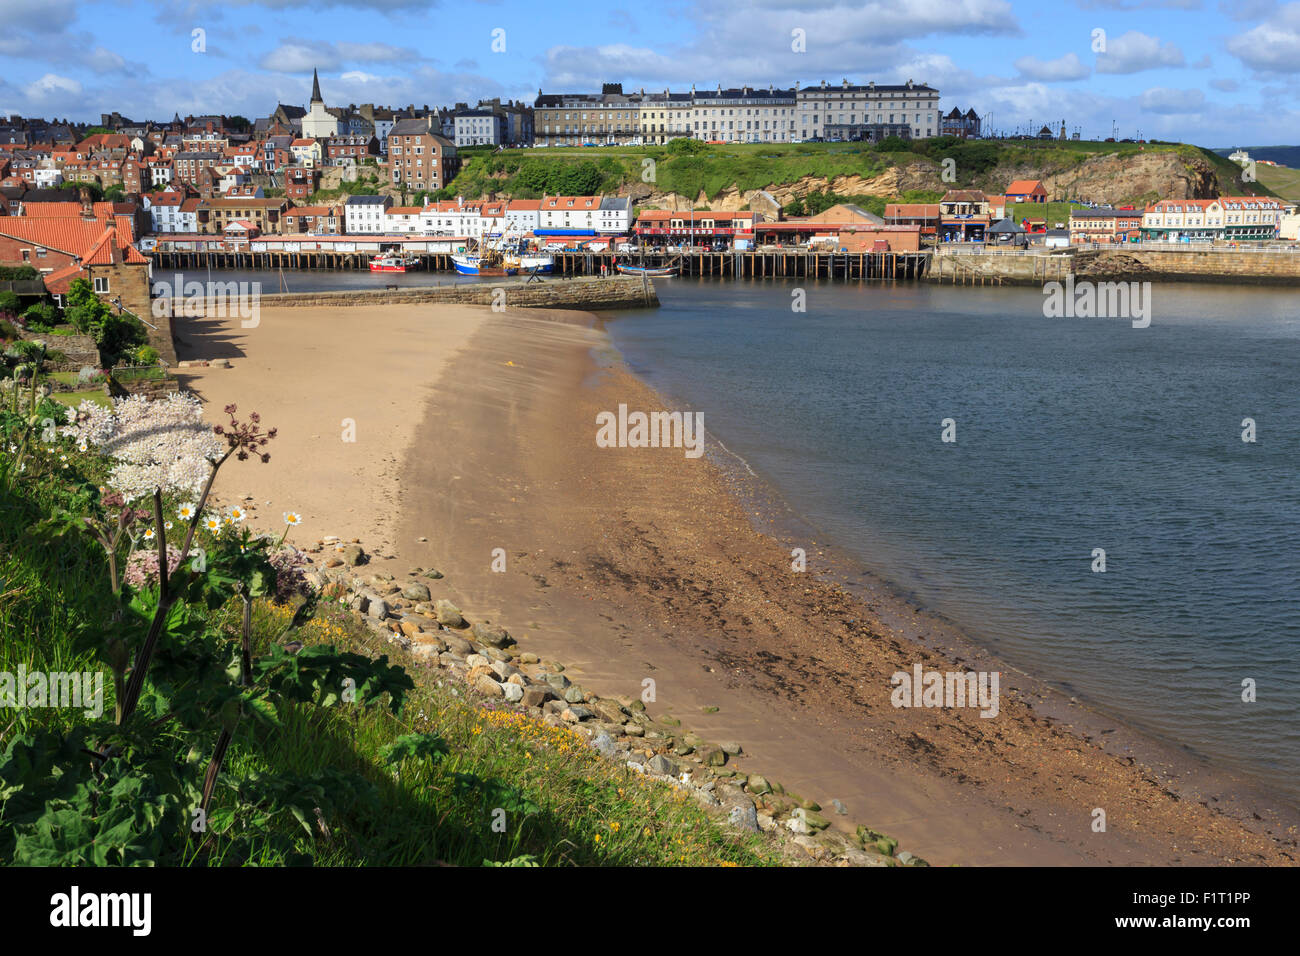 Tate Hill Beach, cliff side wild spring flowers, view to town and West Cliff, Whitby, North Yorkshire, England, United Kingdom Stock Photo